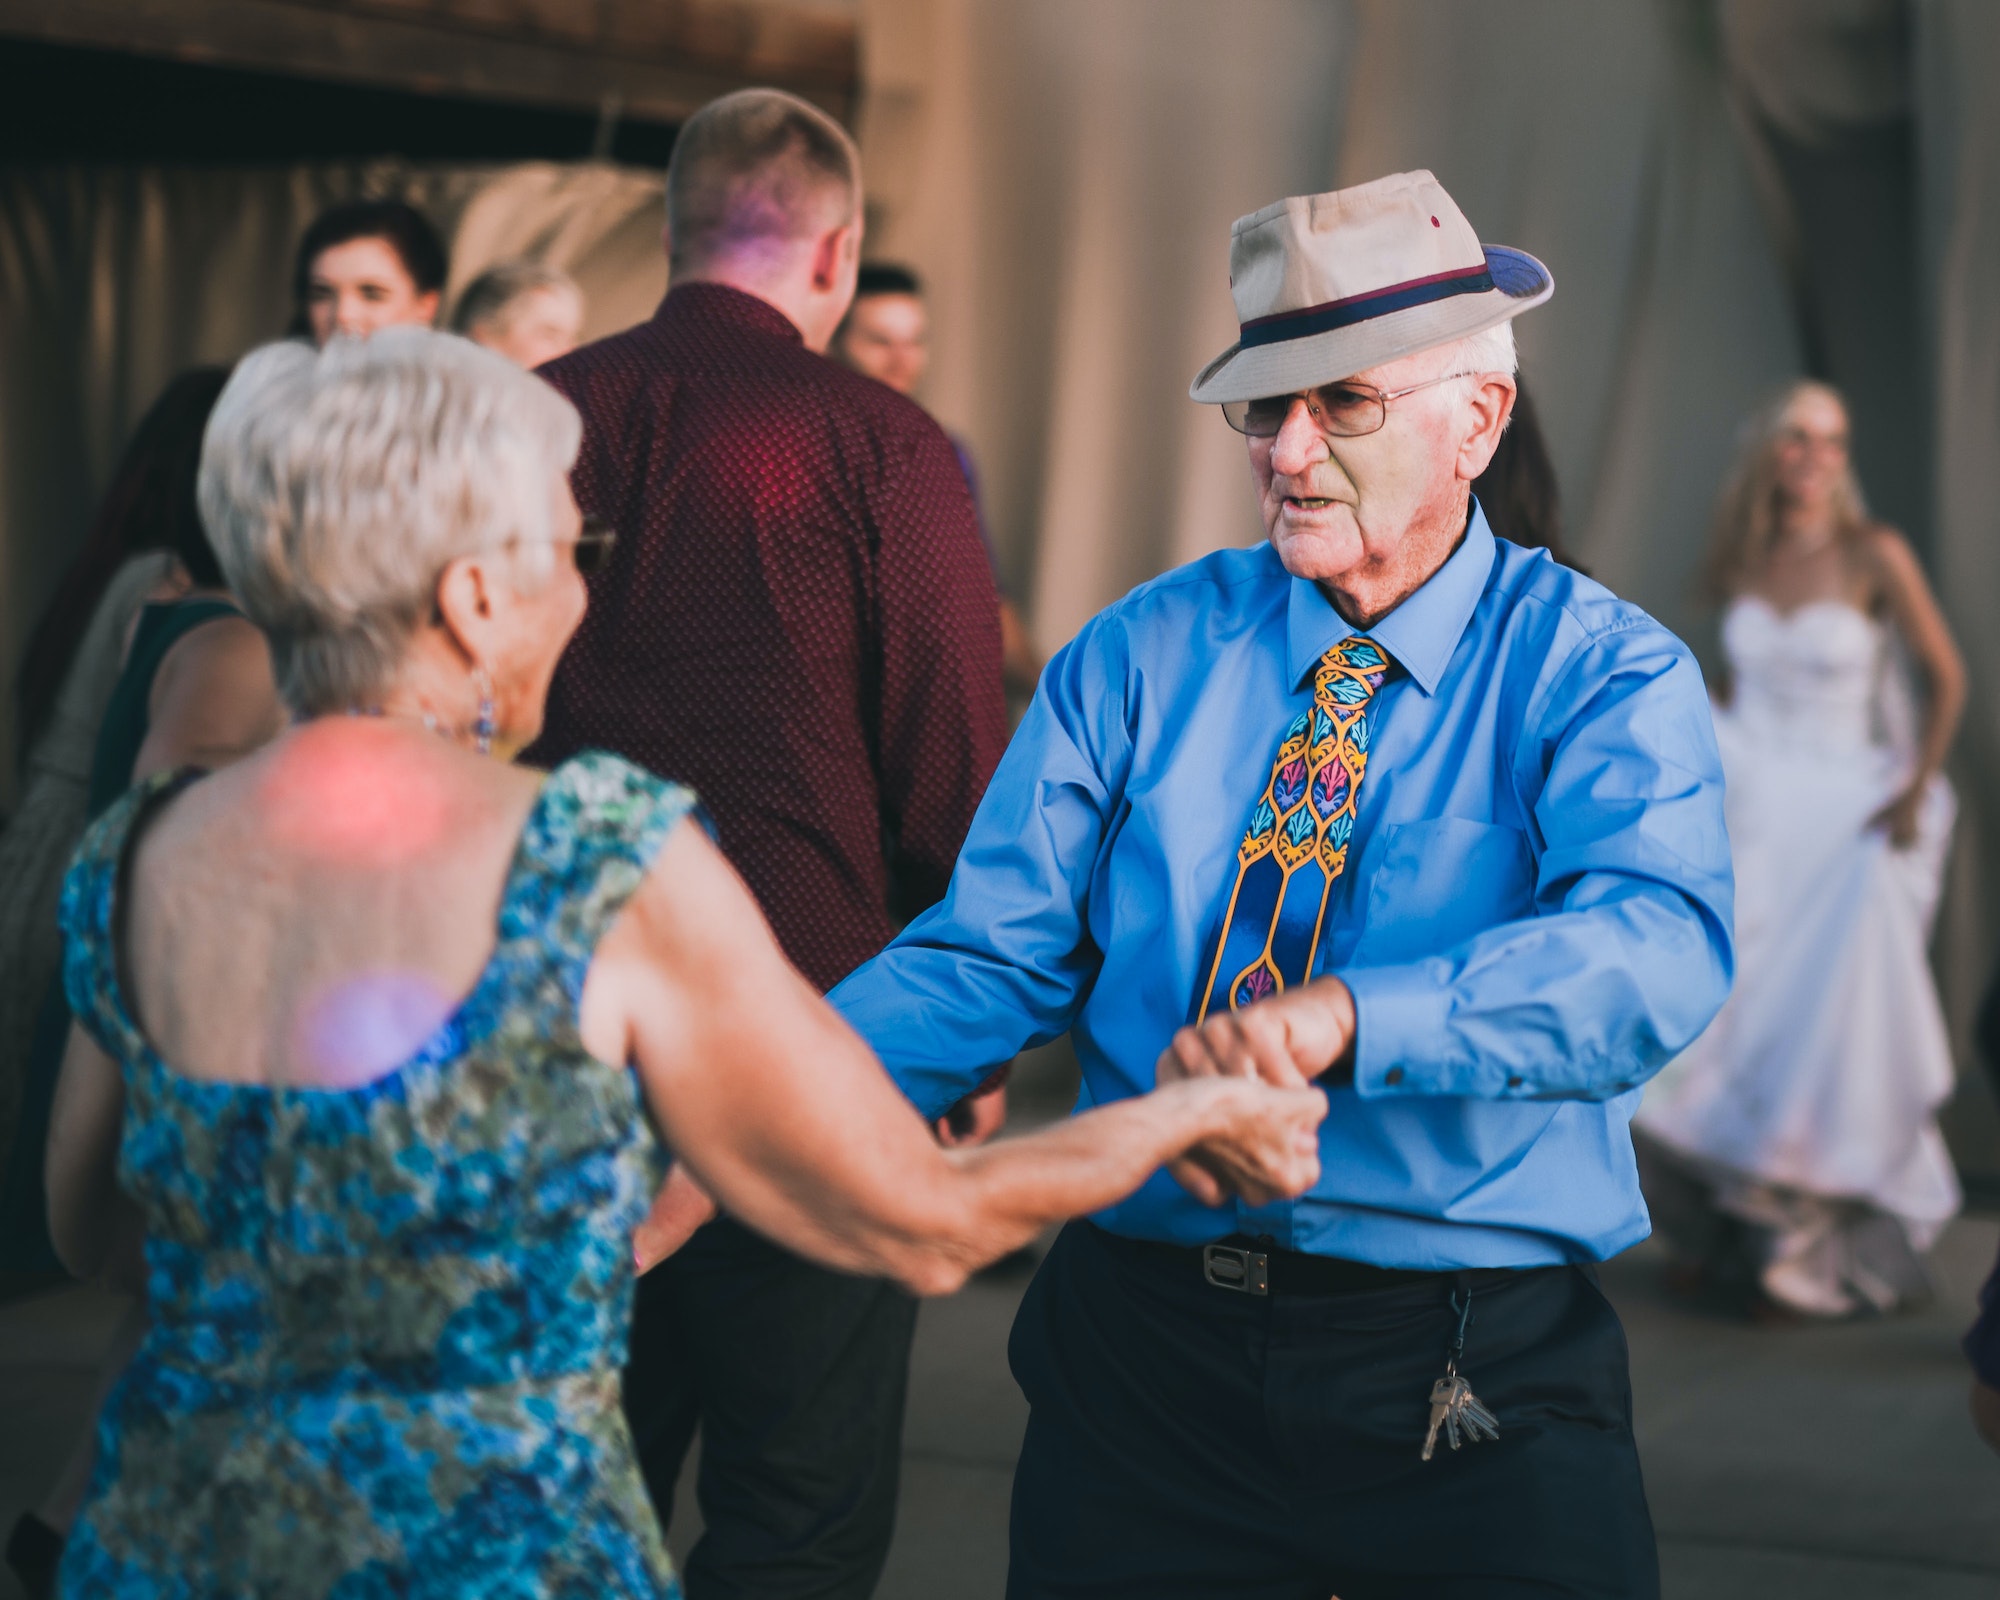 Two active seniors dance on the dance floor at a wedding during sunset.